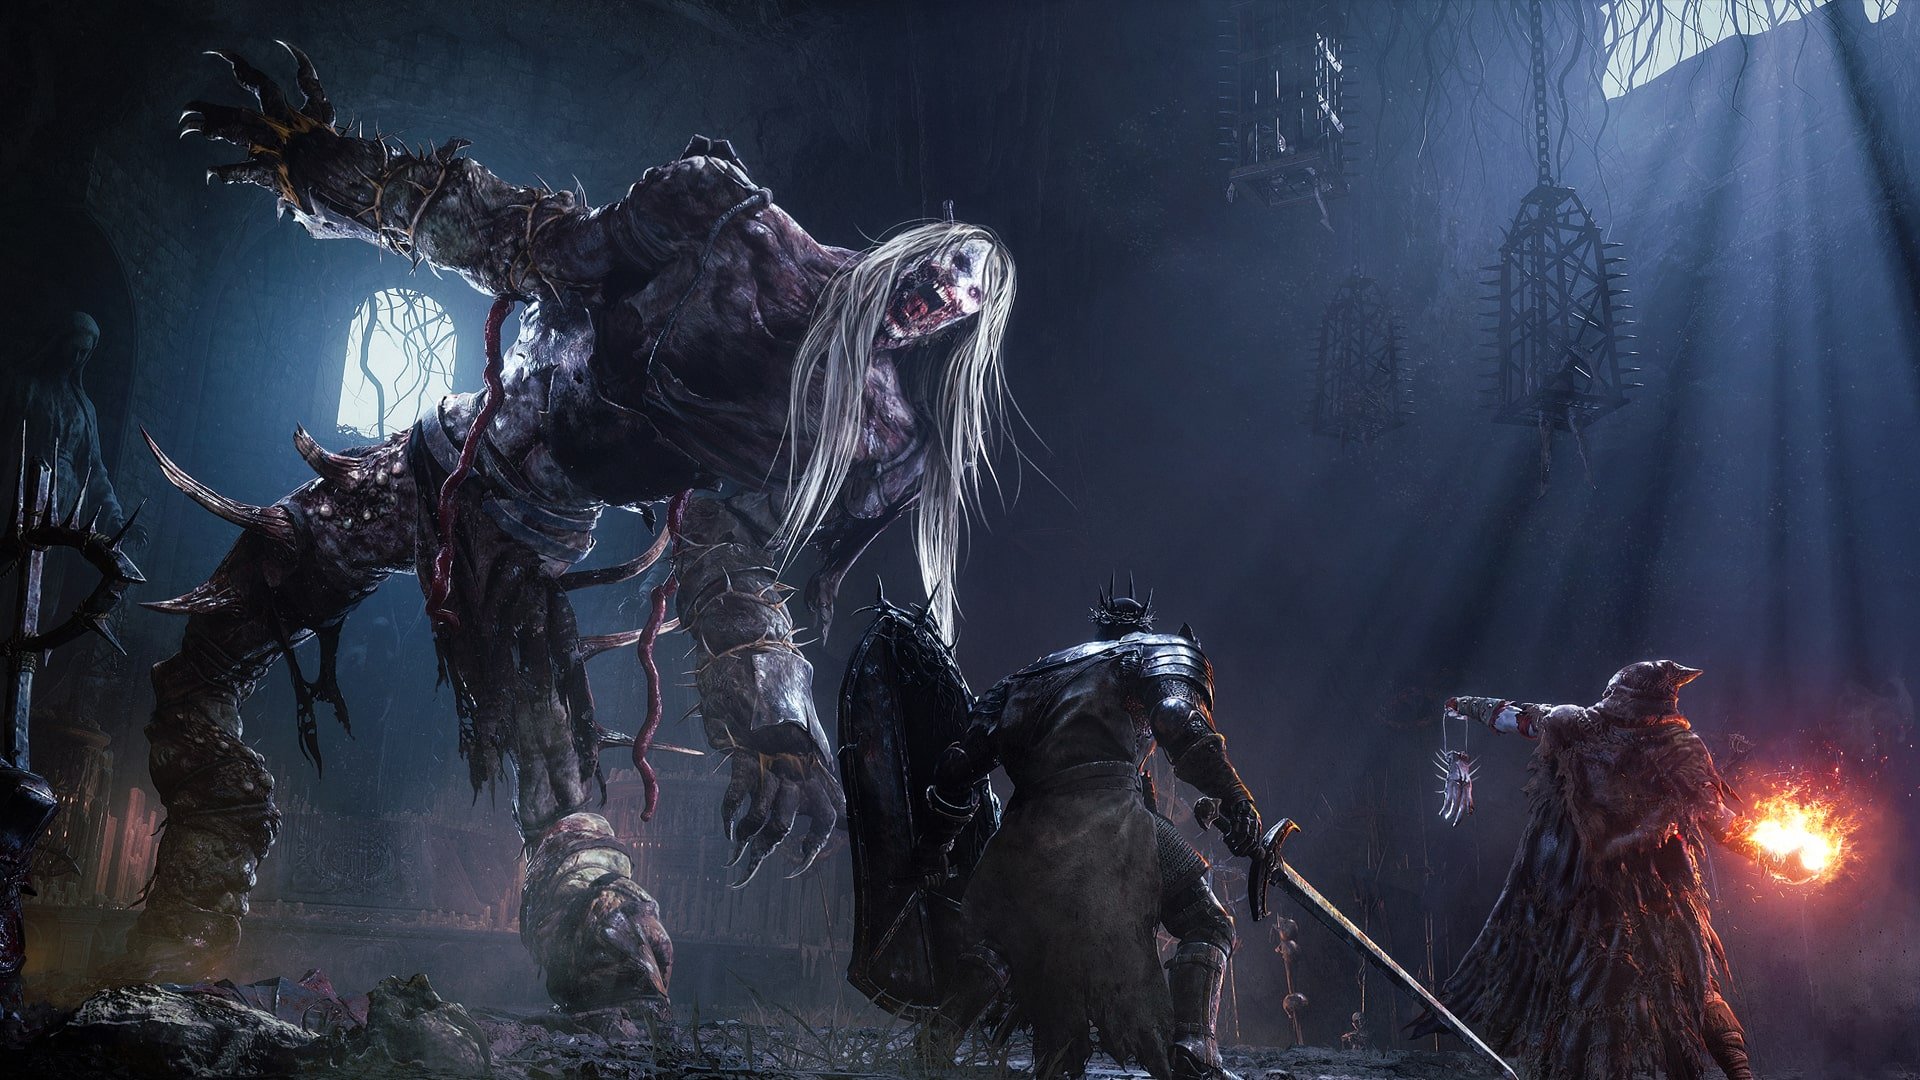 Peril Awaits in Lords of the Fallen with New Gameplay Walkthrough